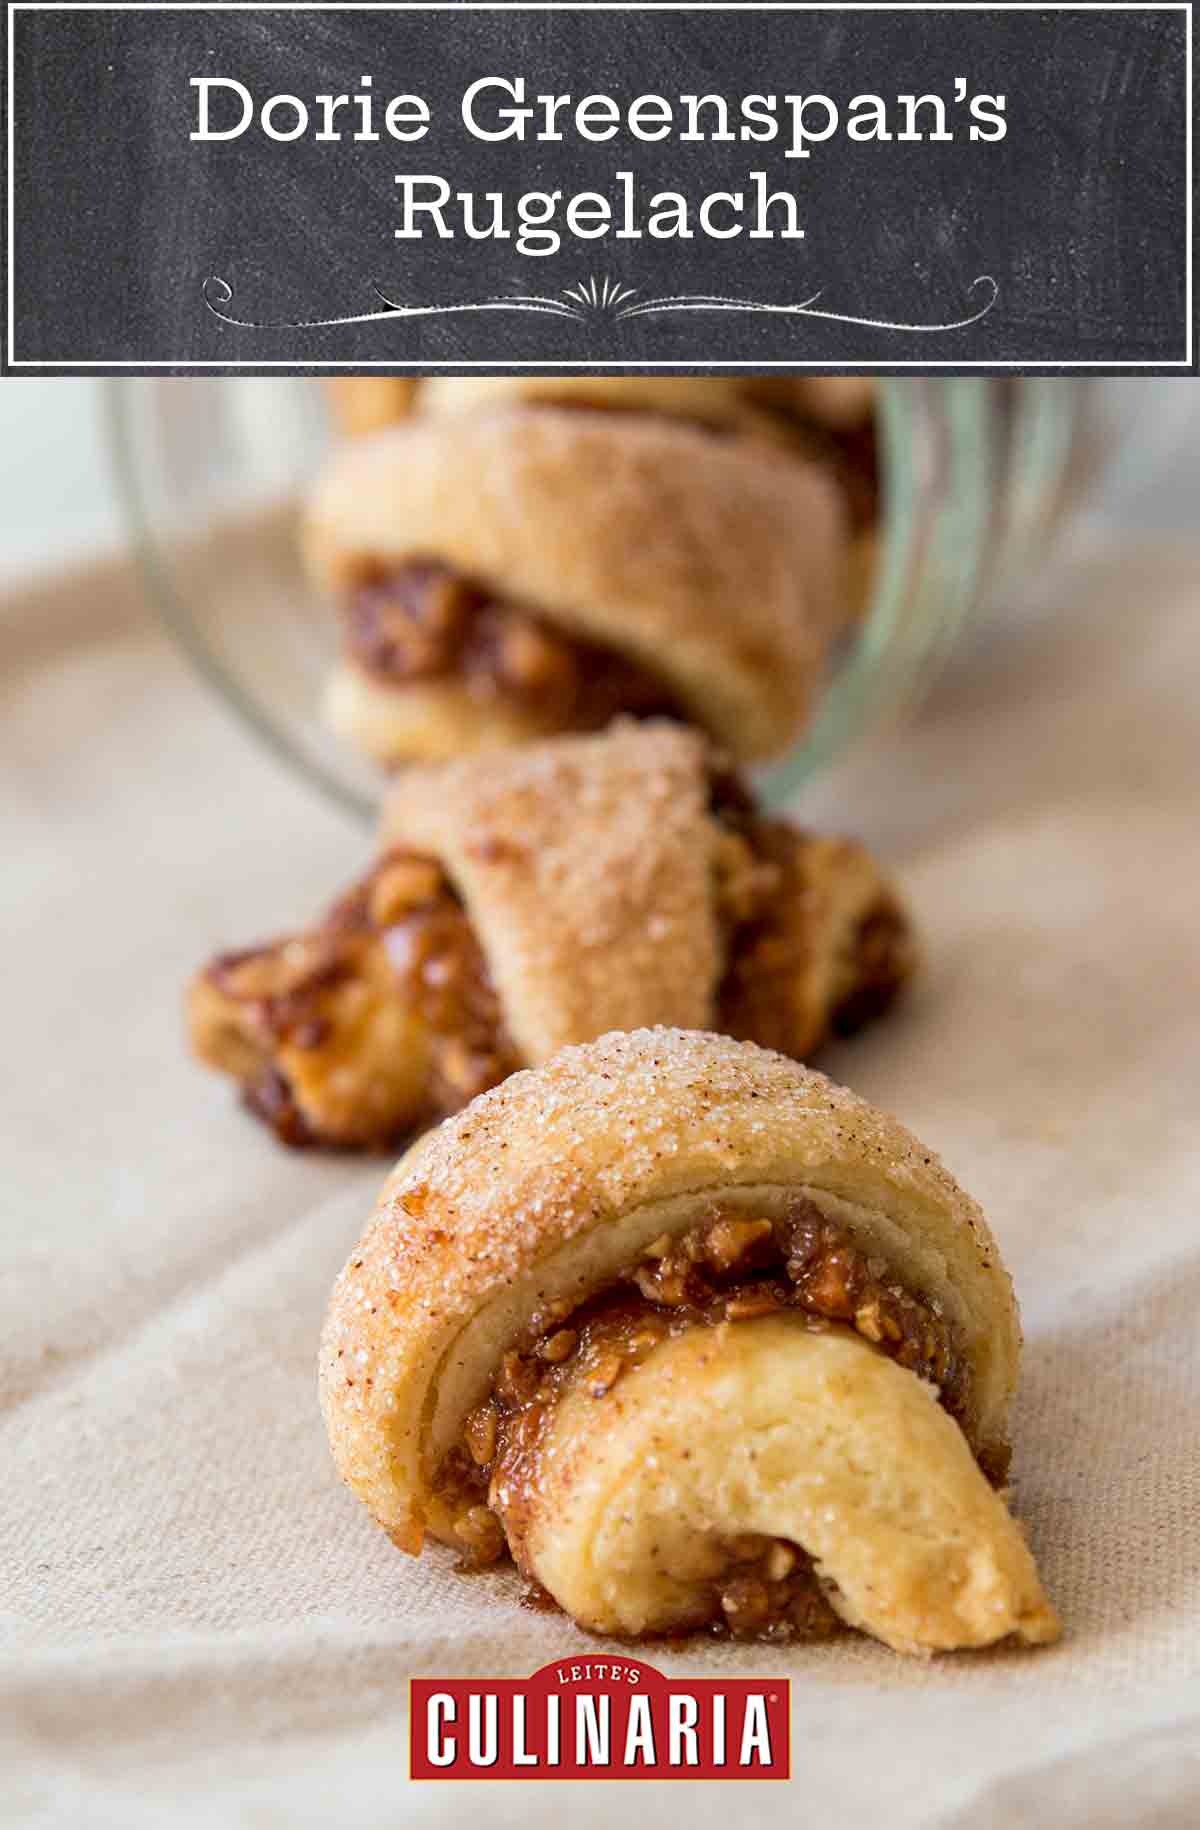 Several of Dorie Greenspan's rugelach tumbling our of a jar